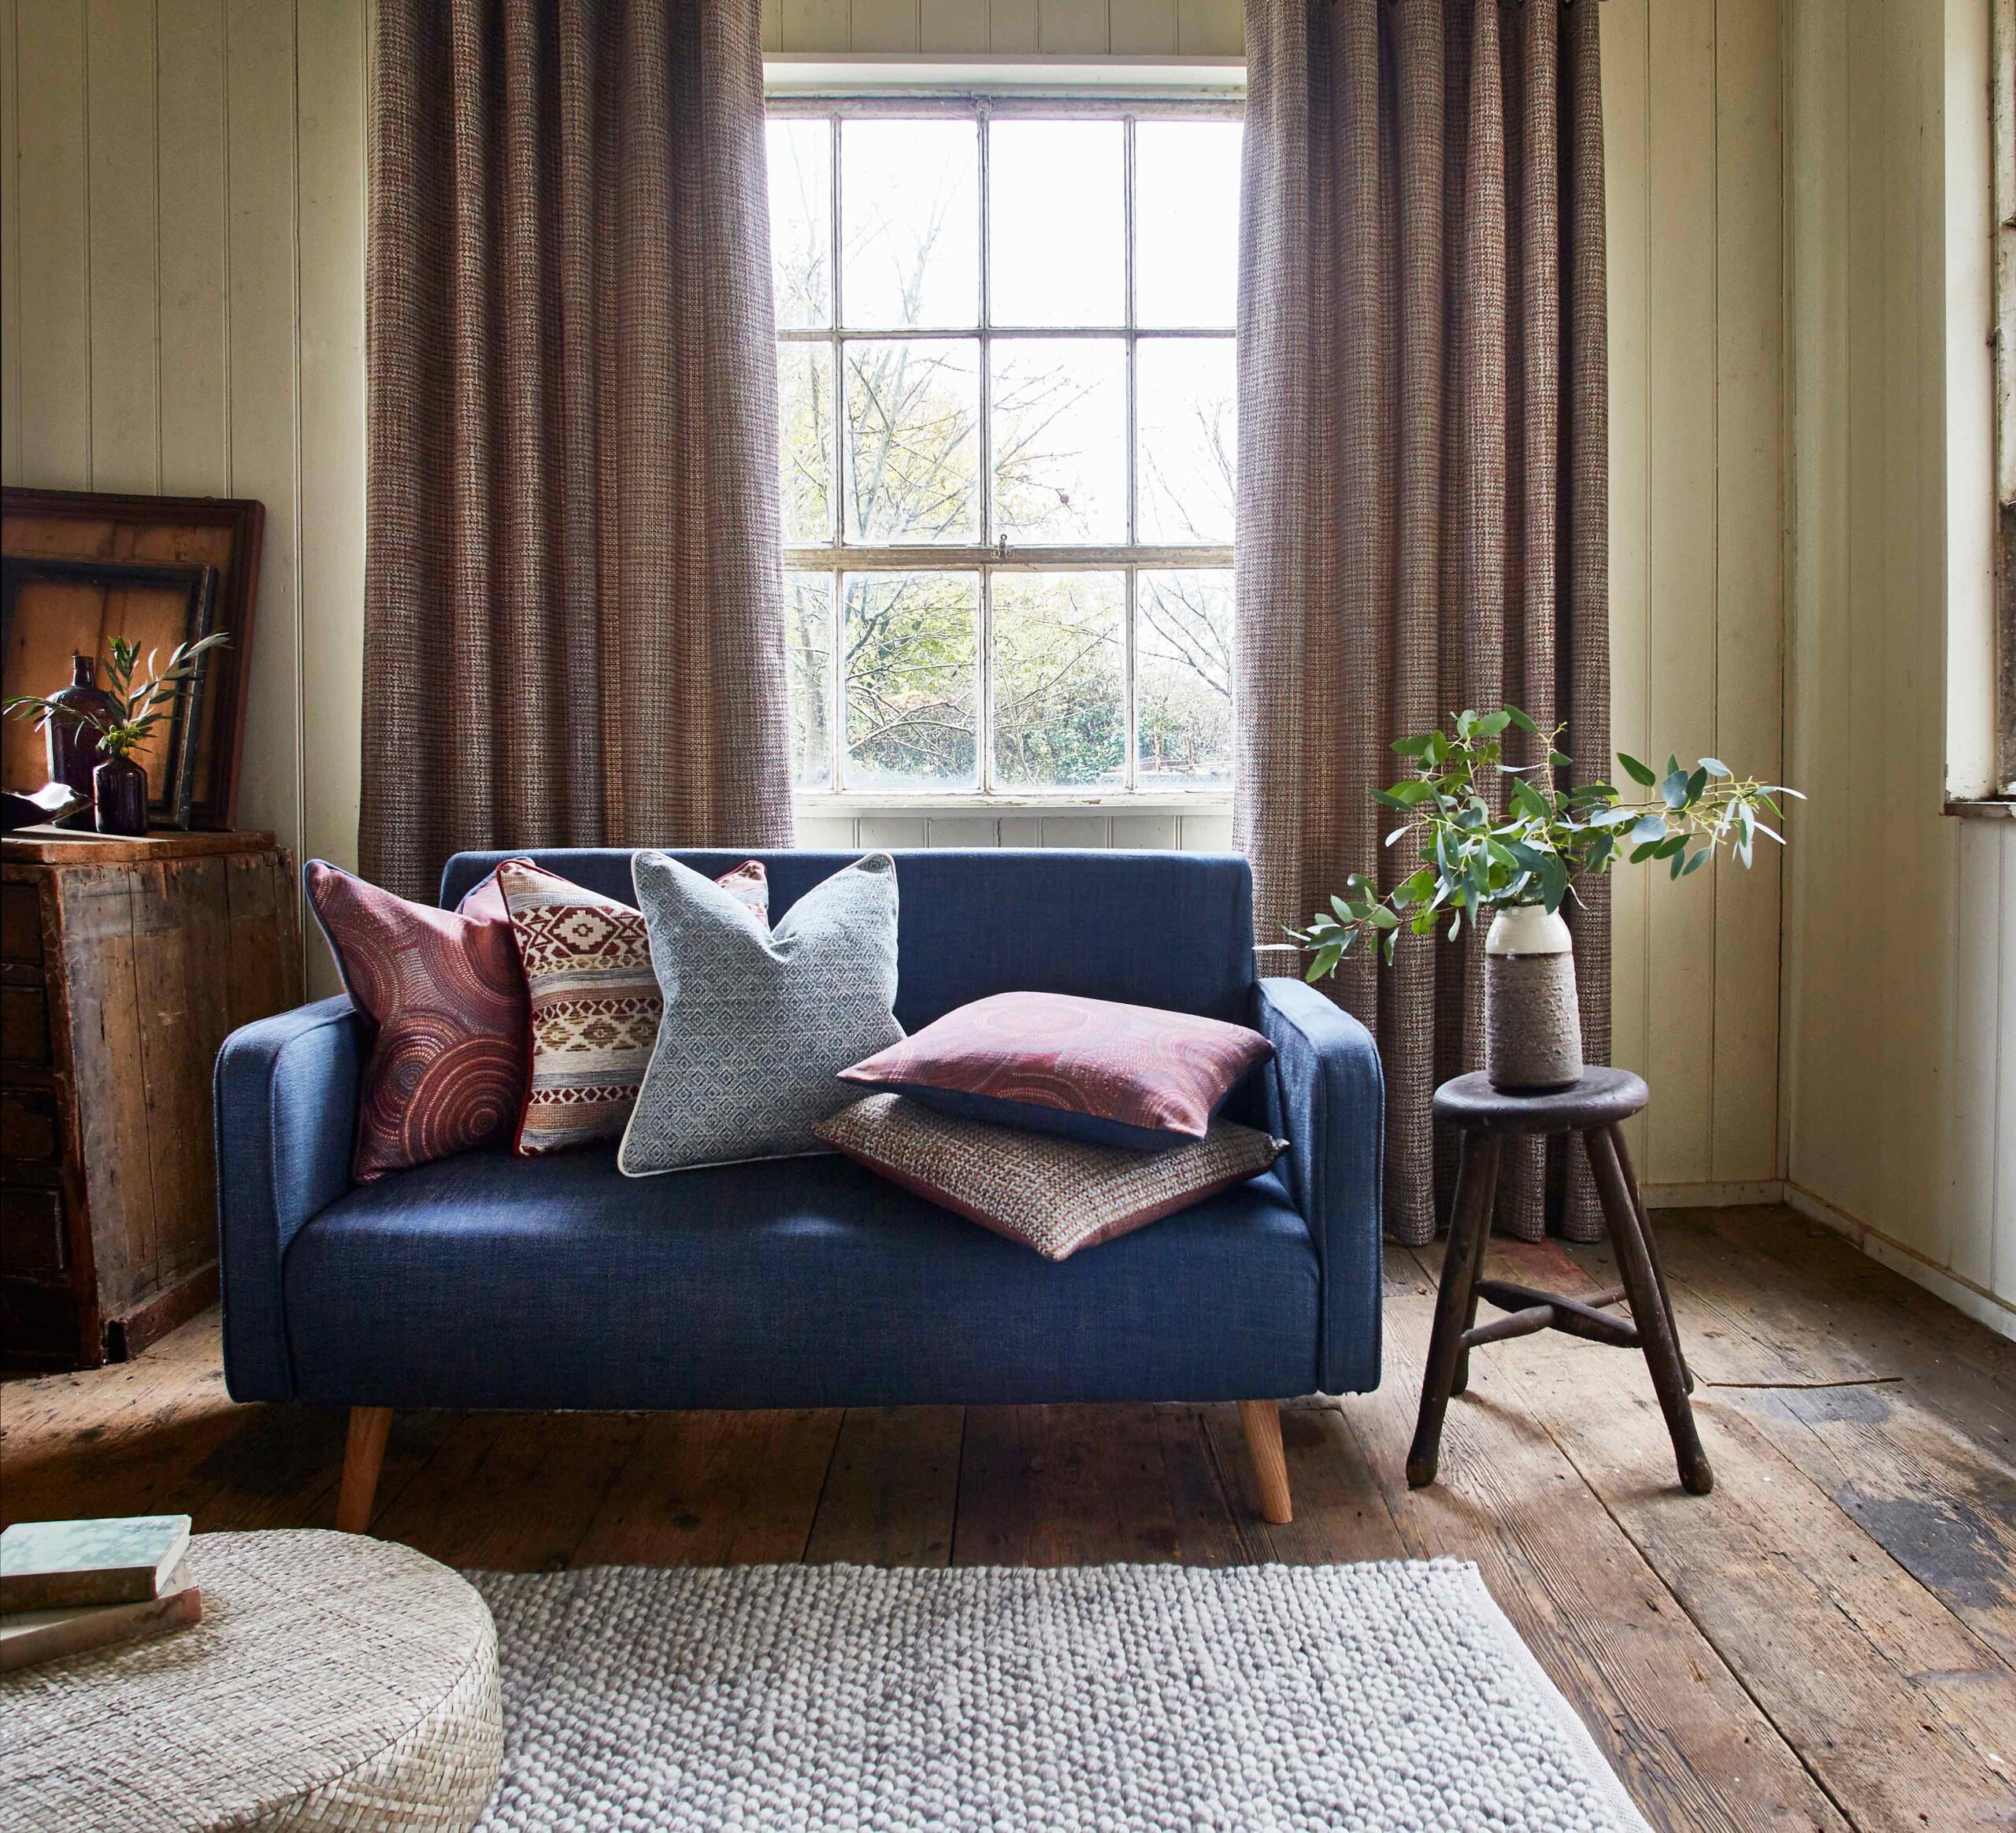 An image of a modern rustic style using fabrics from Prestigious Textile's Inca Trail collection